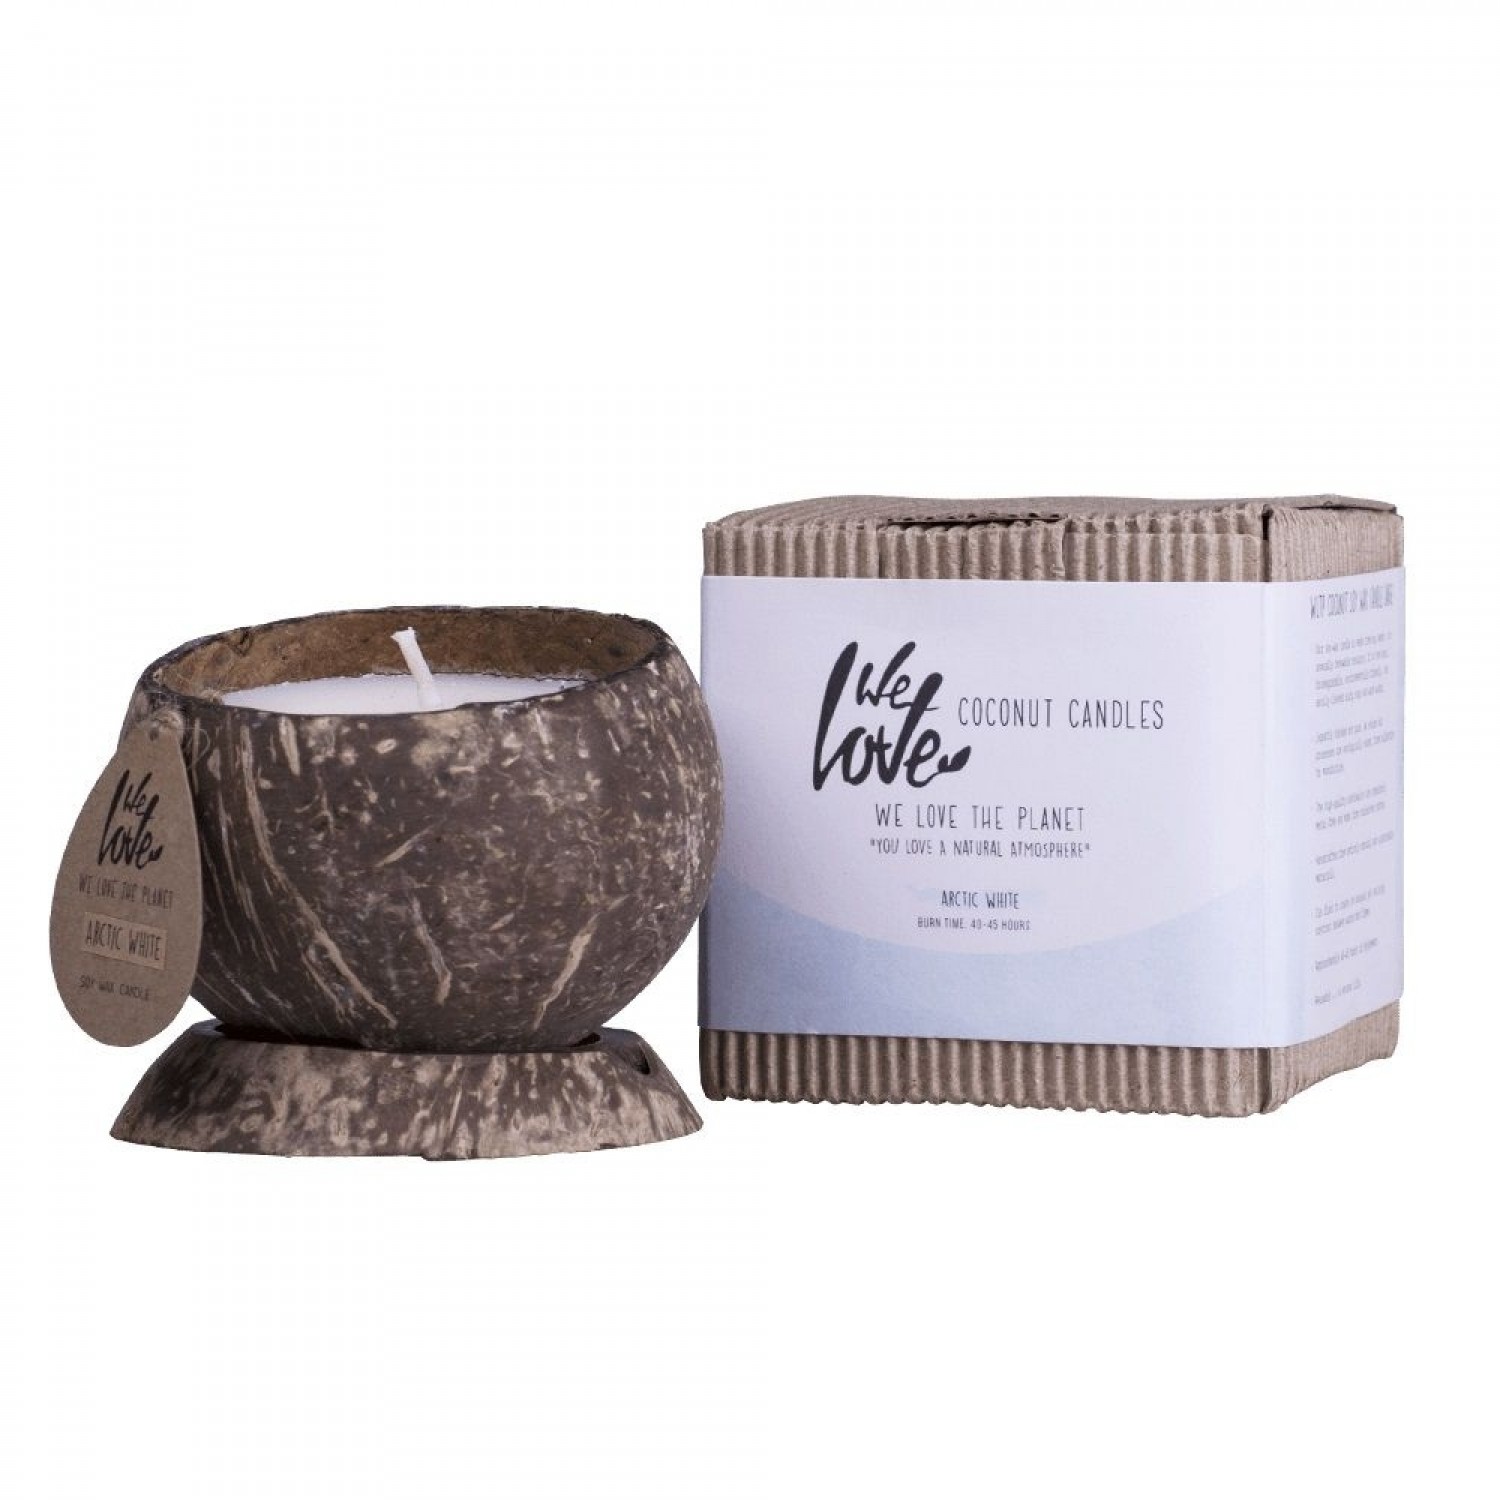 Coconut Soy Wax Candle Artic White » We Love the Planet